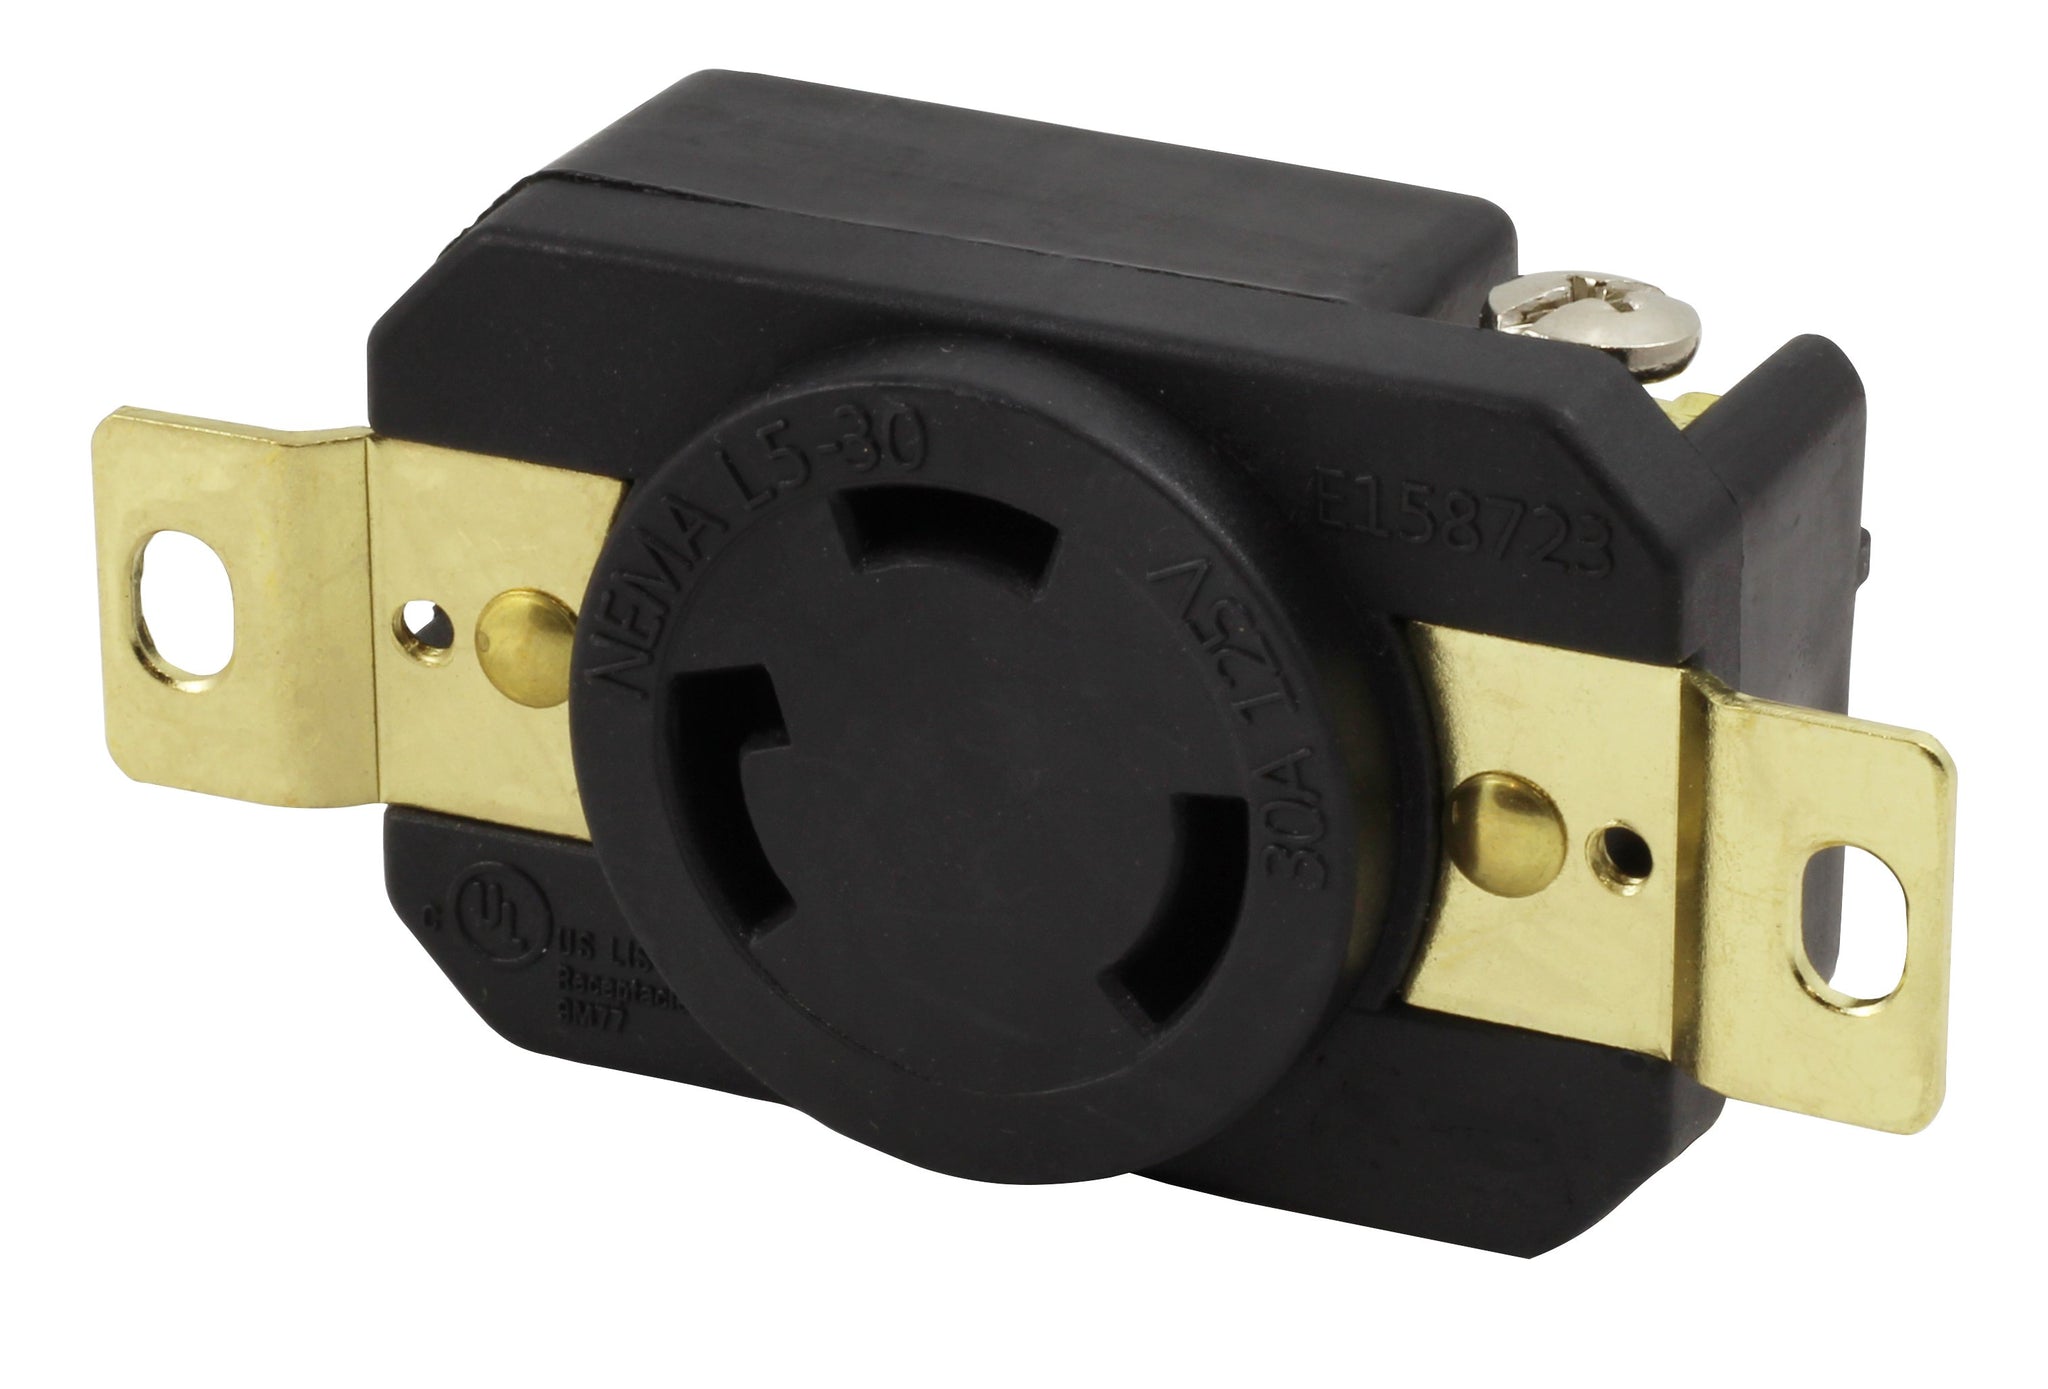 NEMA L5-30R 30A 125V Twist Lock Female Wall Outlet Receptacle US 3 Wire  Grounding Flush Mounting Power Generator Receptacle